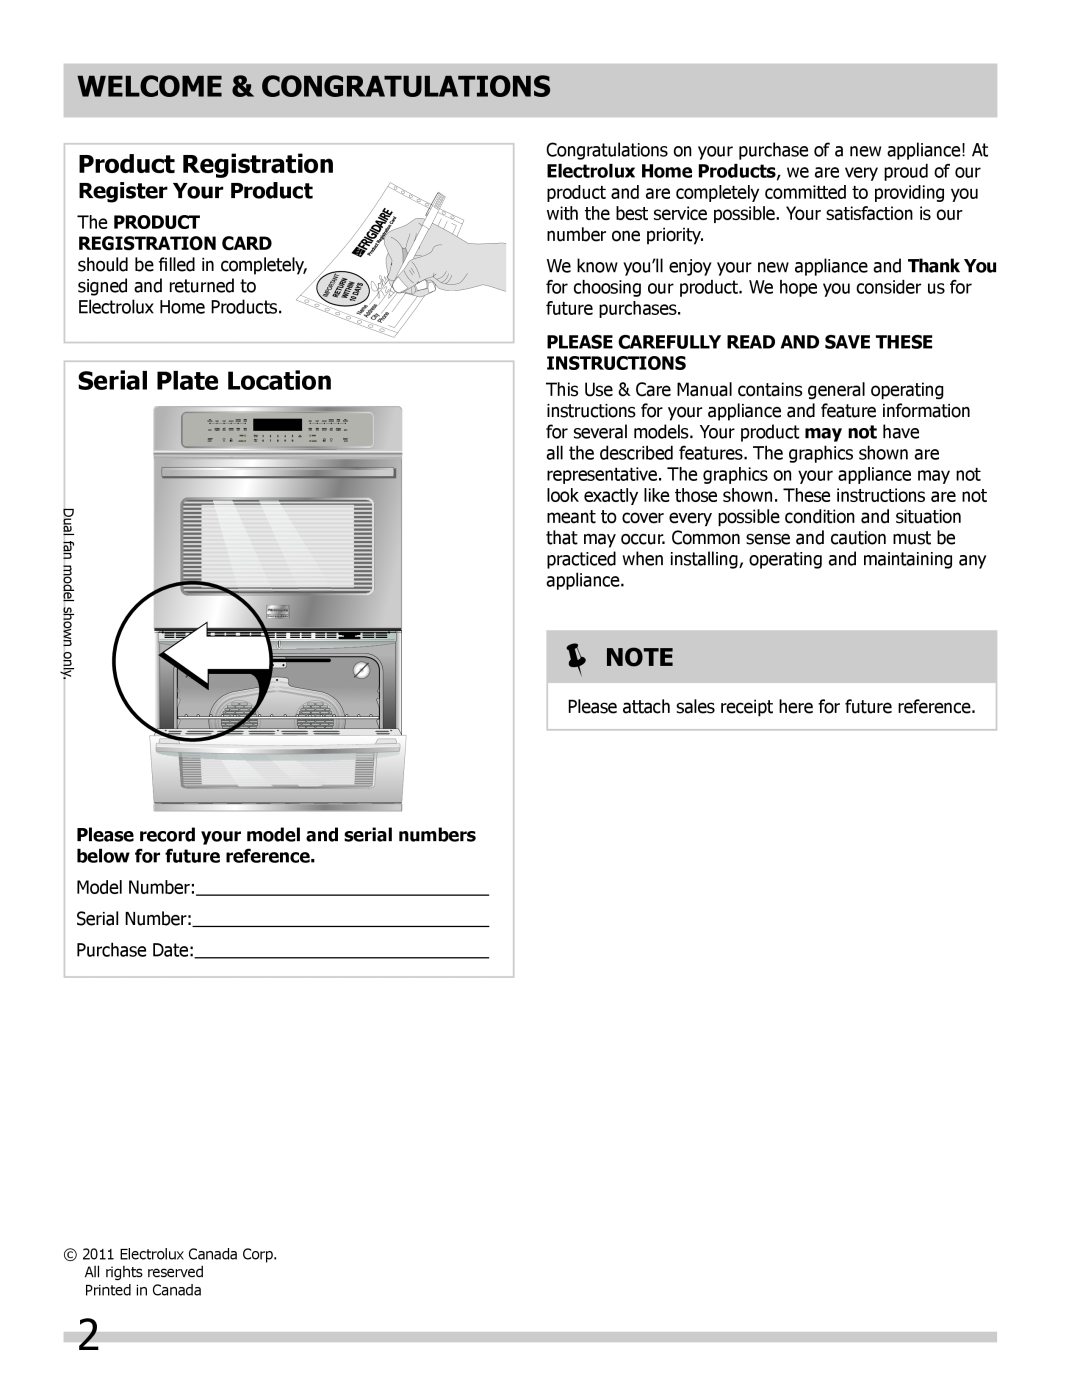 Frigidaire FFET3025LW manual Welcome & Congratulations, Product Registration, Serial Plate Location,  Note, The PRODUCT 